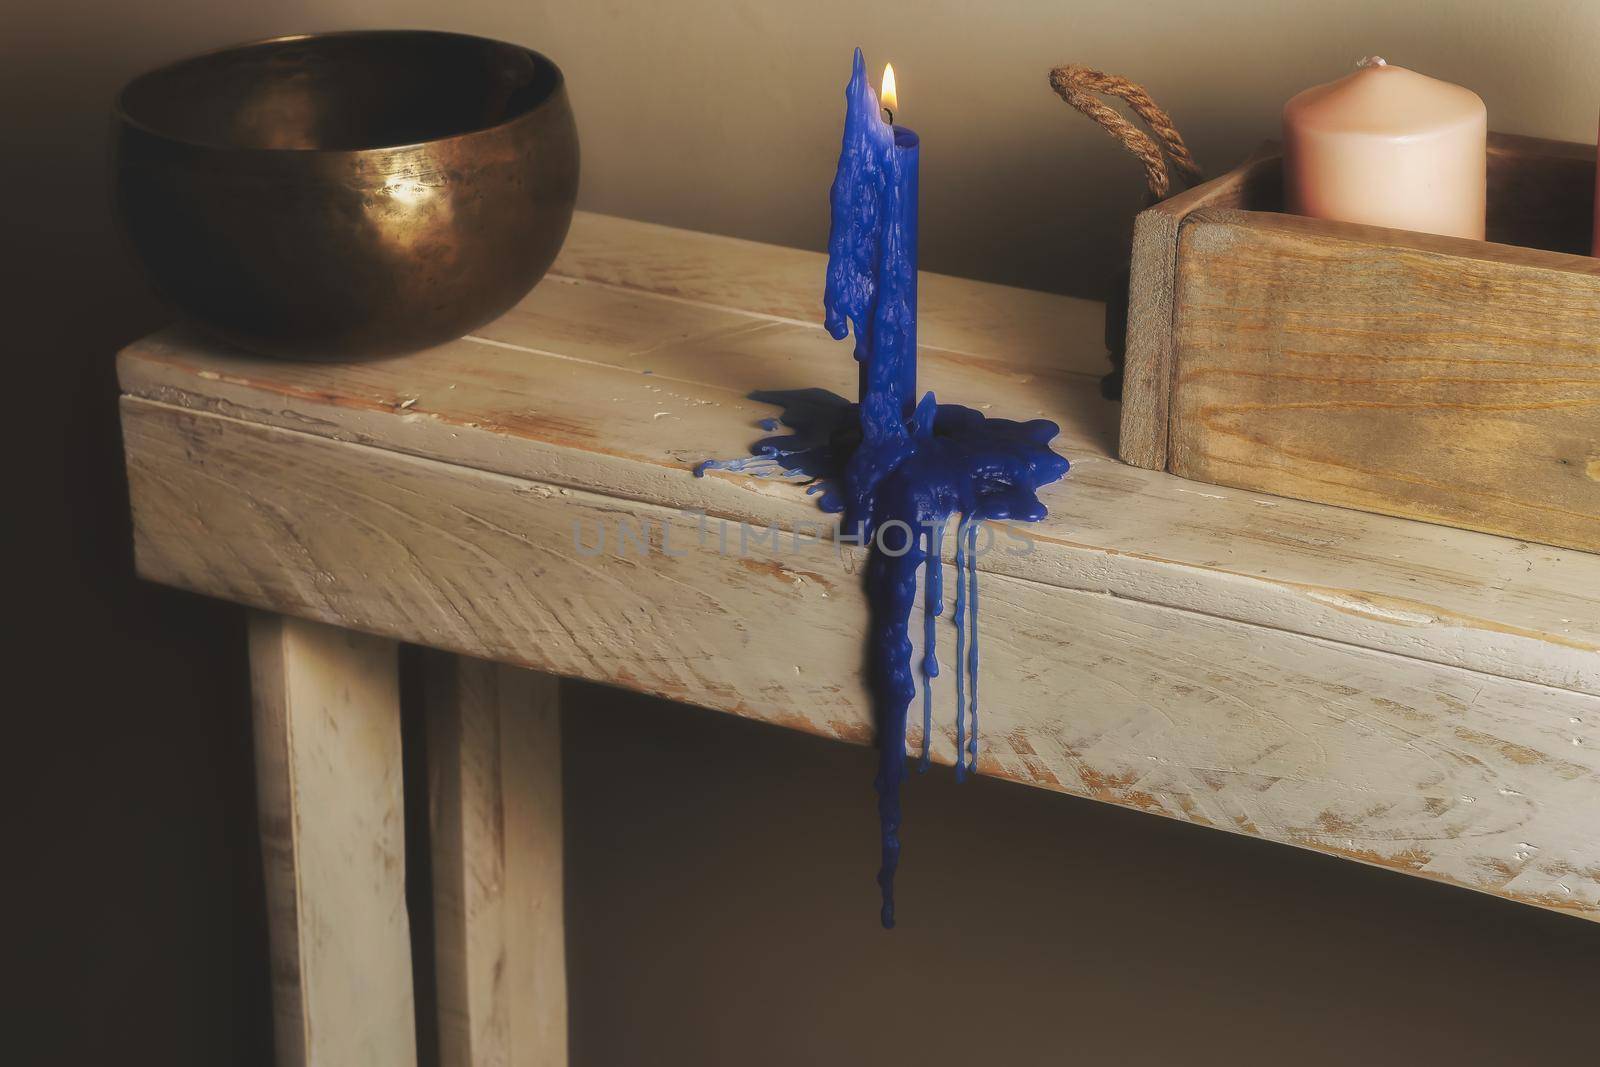 lighted and melted blue candle, Tibetan bowl and a wooden tray with candles on a wooden table